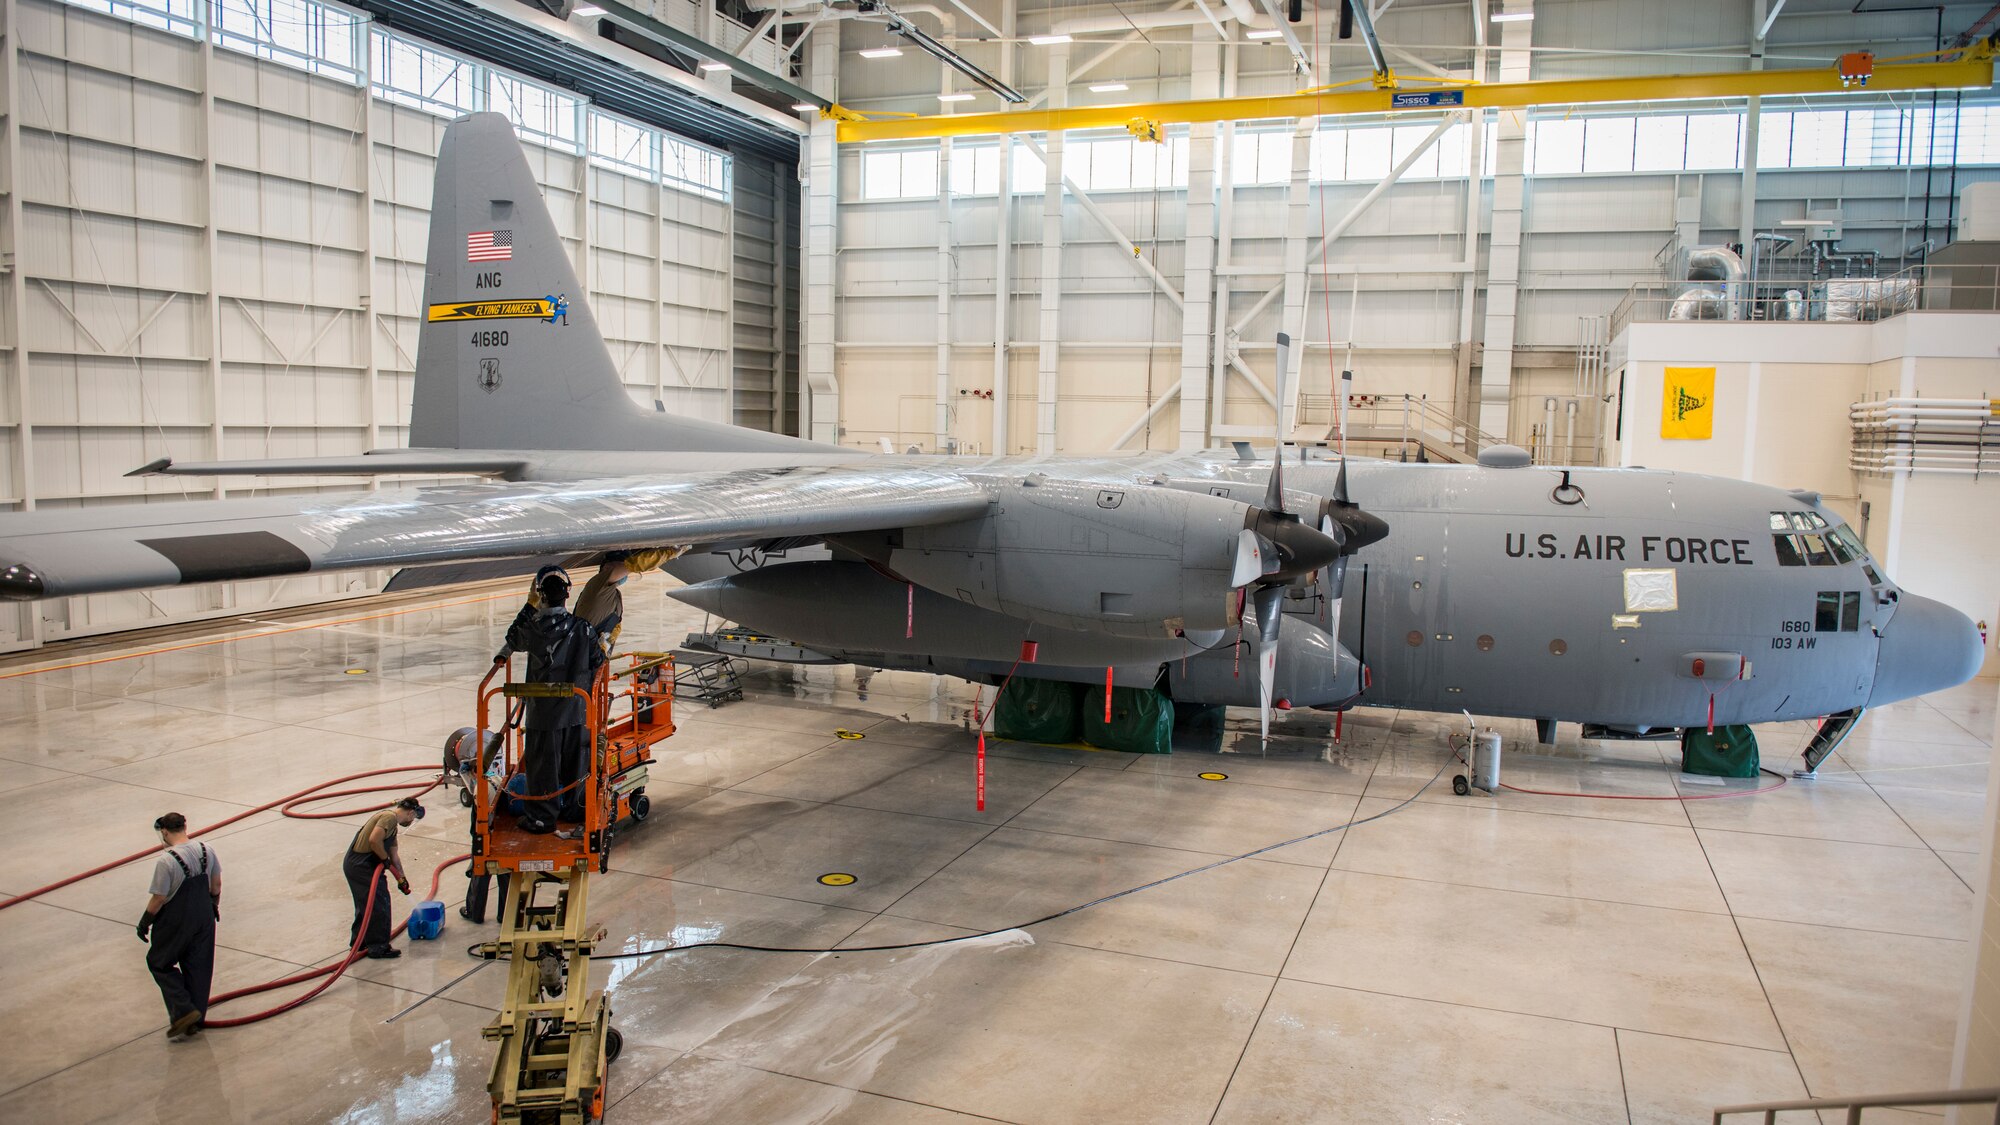 Airmen from the 103rd Maintenance Group wash a C-130H Hercules at the Bradley Air National Guard Base fuel cell and corrosion control facility in East Granby, Connecticut, July 13, 2020. Each of the 103rd Airlift Wing’s eight C-130 aircraft are washed every six months to clean contaminants and prevent corrosion, ensuring aircraft readiness and extending its life cycle. (U.S. Air National Guard photo by Staff Sgt. Steven Tucker)